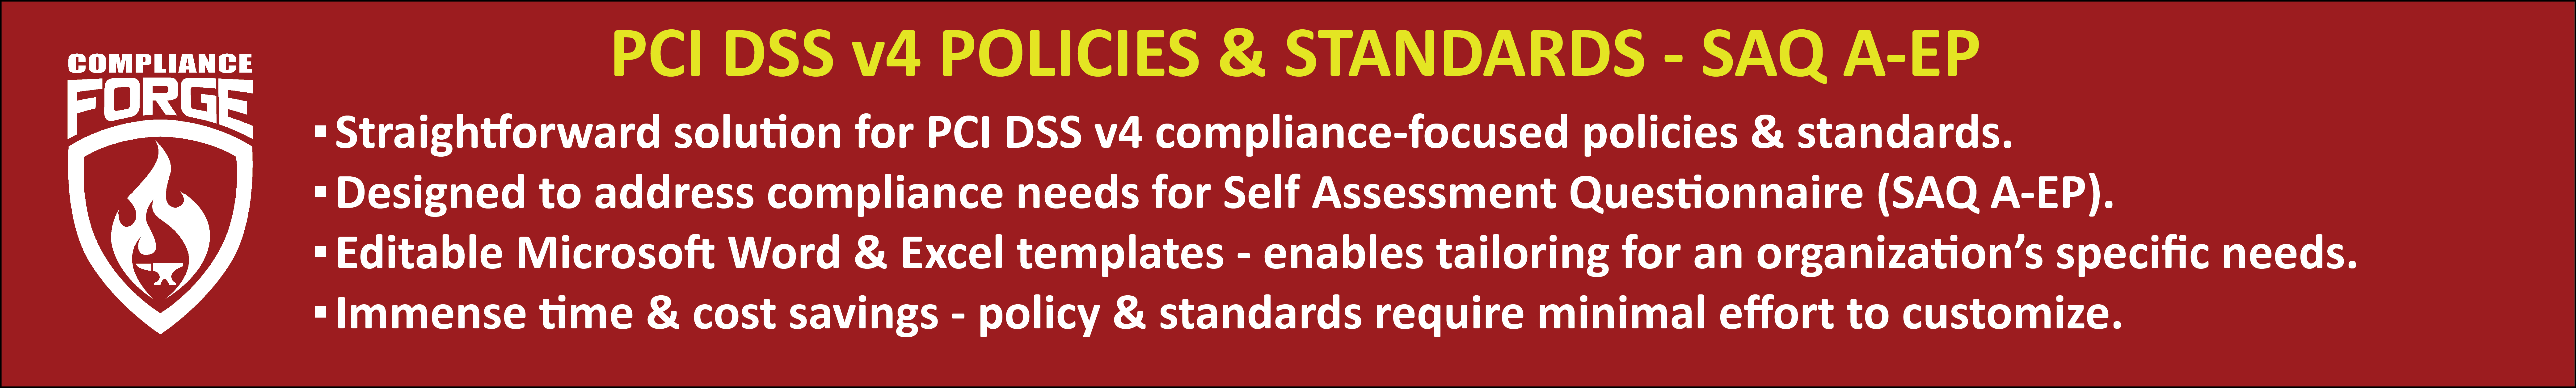 PCI DSS v4 SAQ A-EP policies and standards example